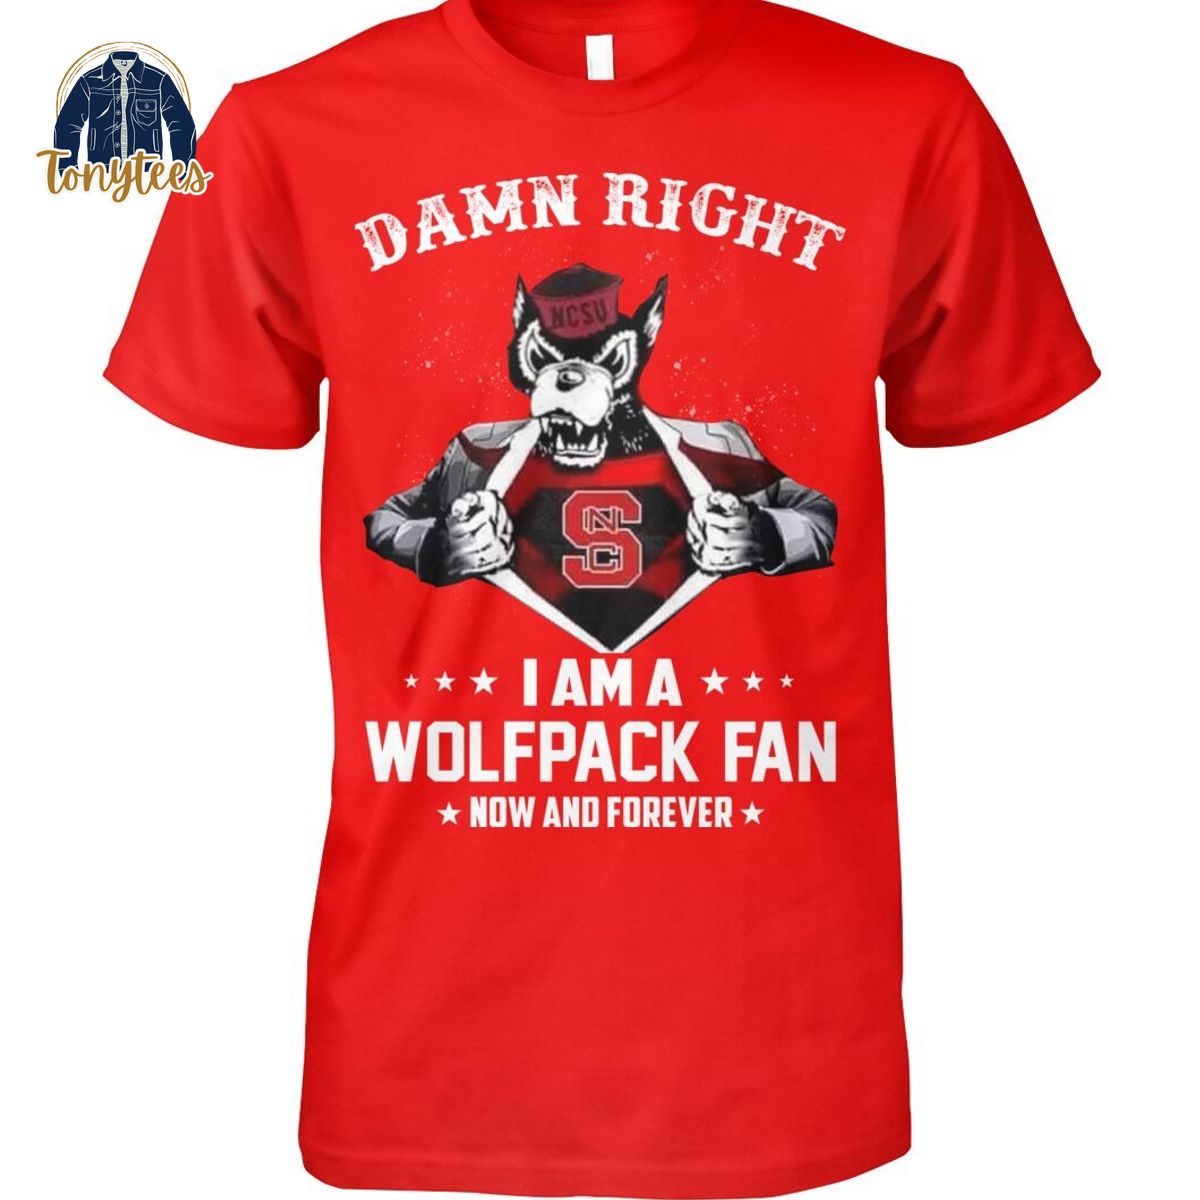 Danb right I am a Wolfpack fan now and forever shirt